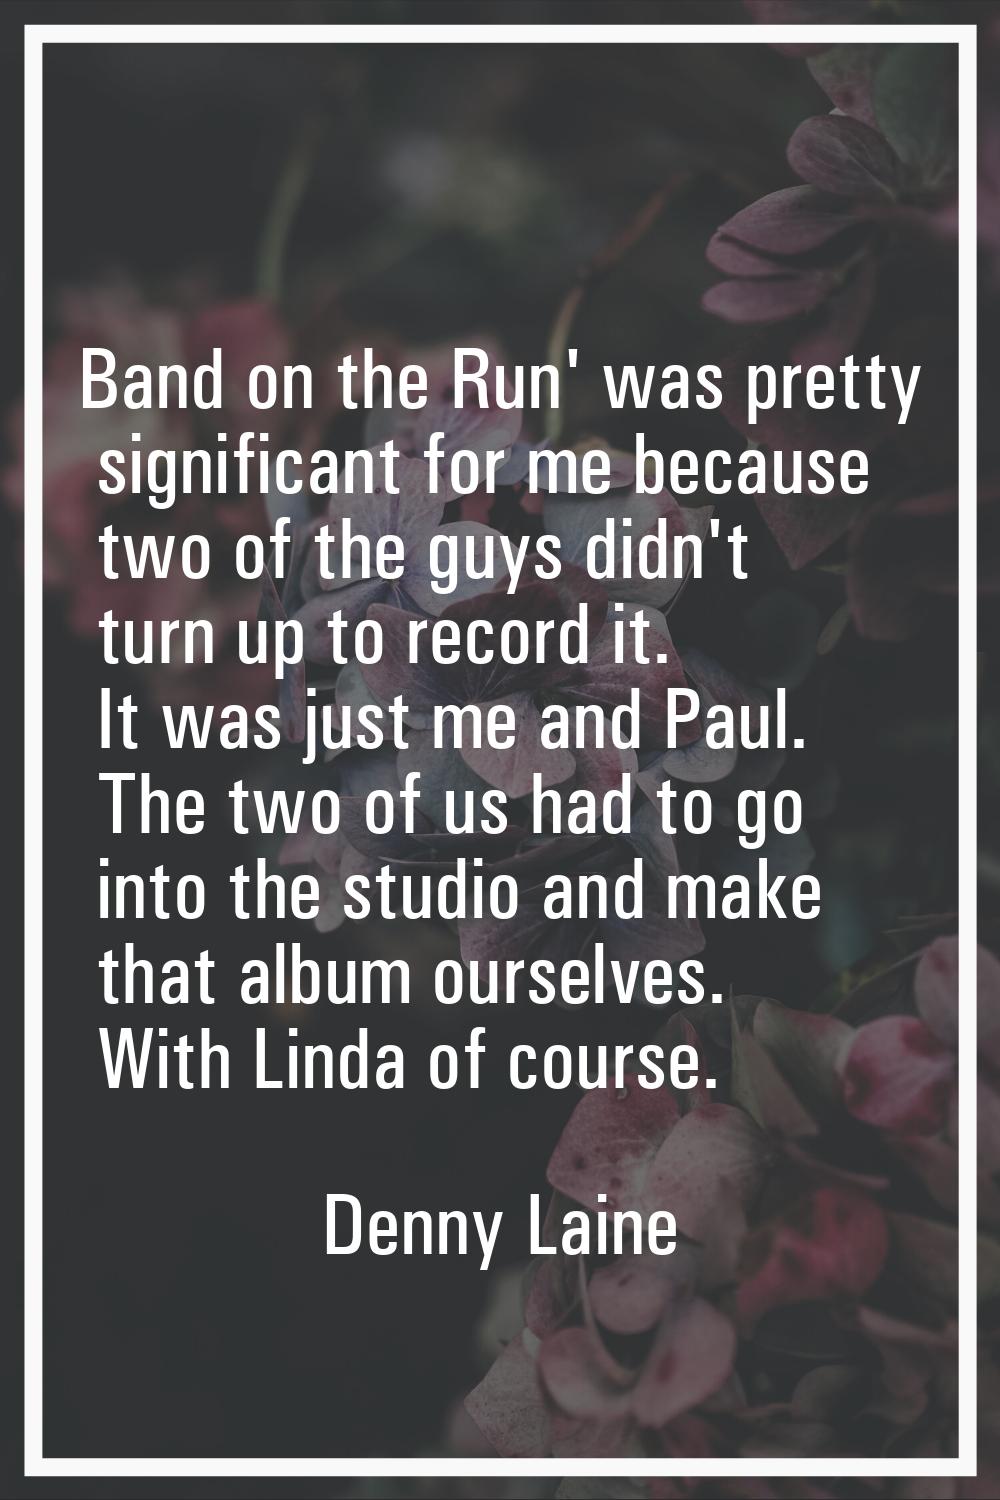 Band on the Run' was pretty significant for me because two of the guys didn't turn up to record it.